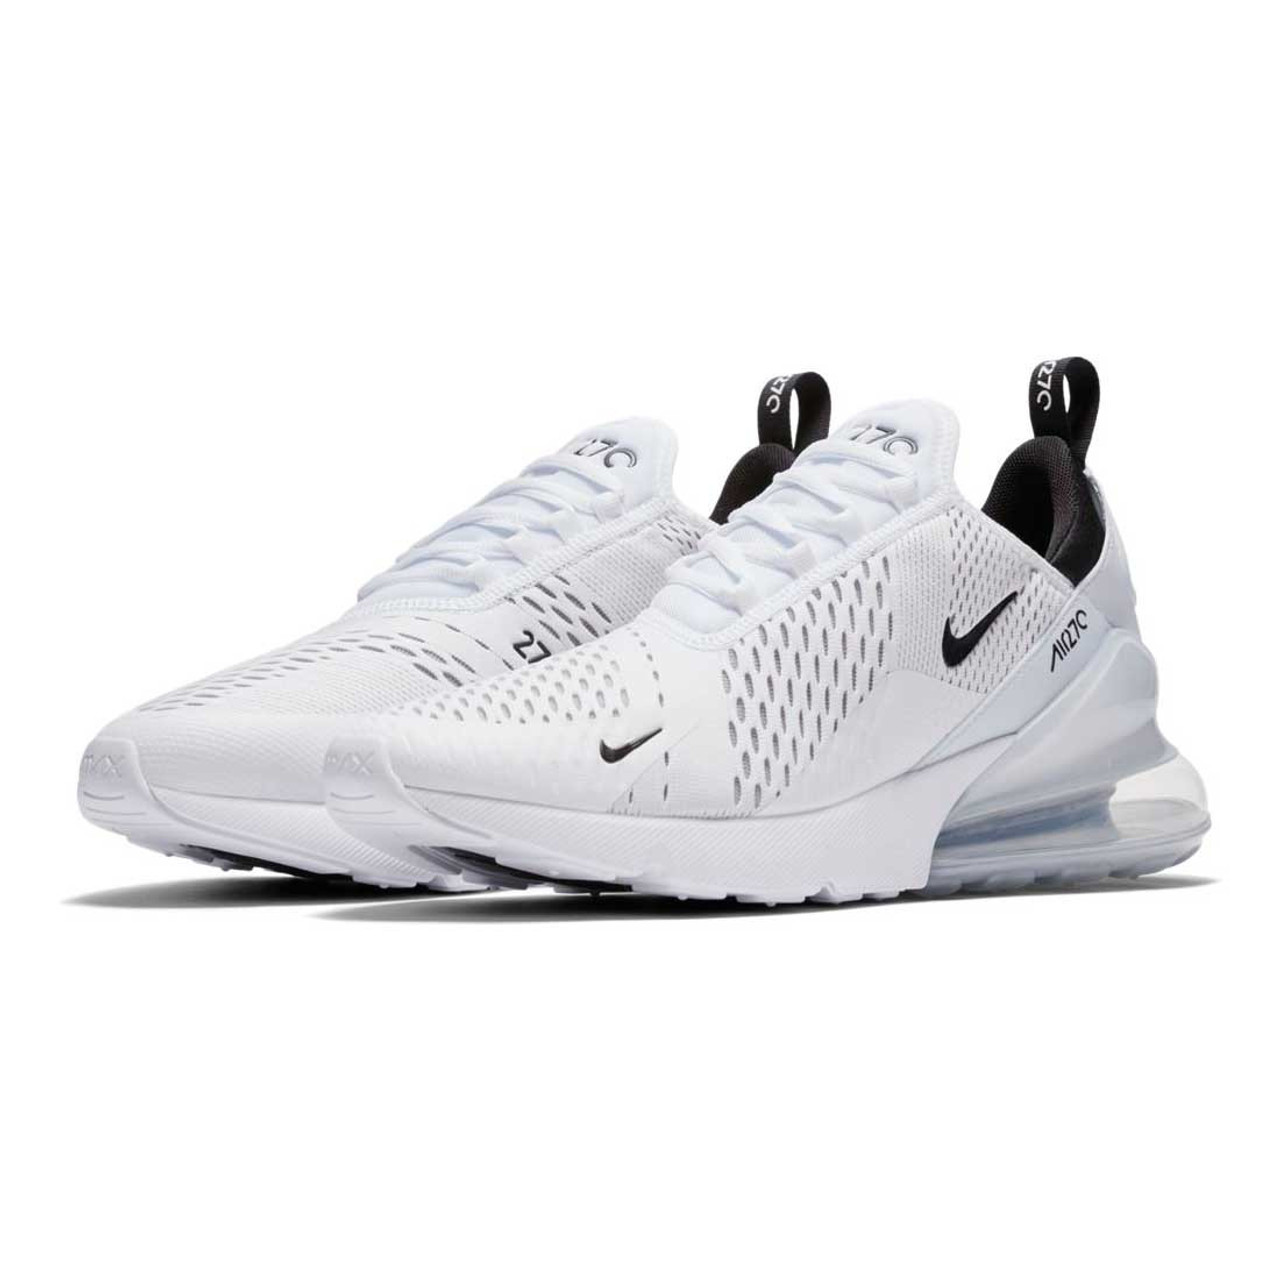 Not complicated multipurpose Missionary Nike Men's White/Black Air Max 270 Shoes $ 159.99 | TYLER'S